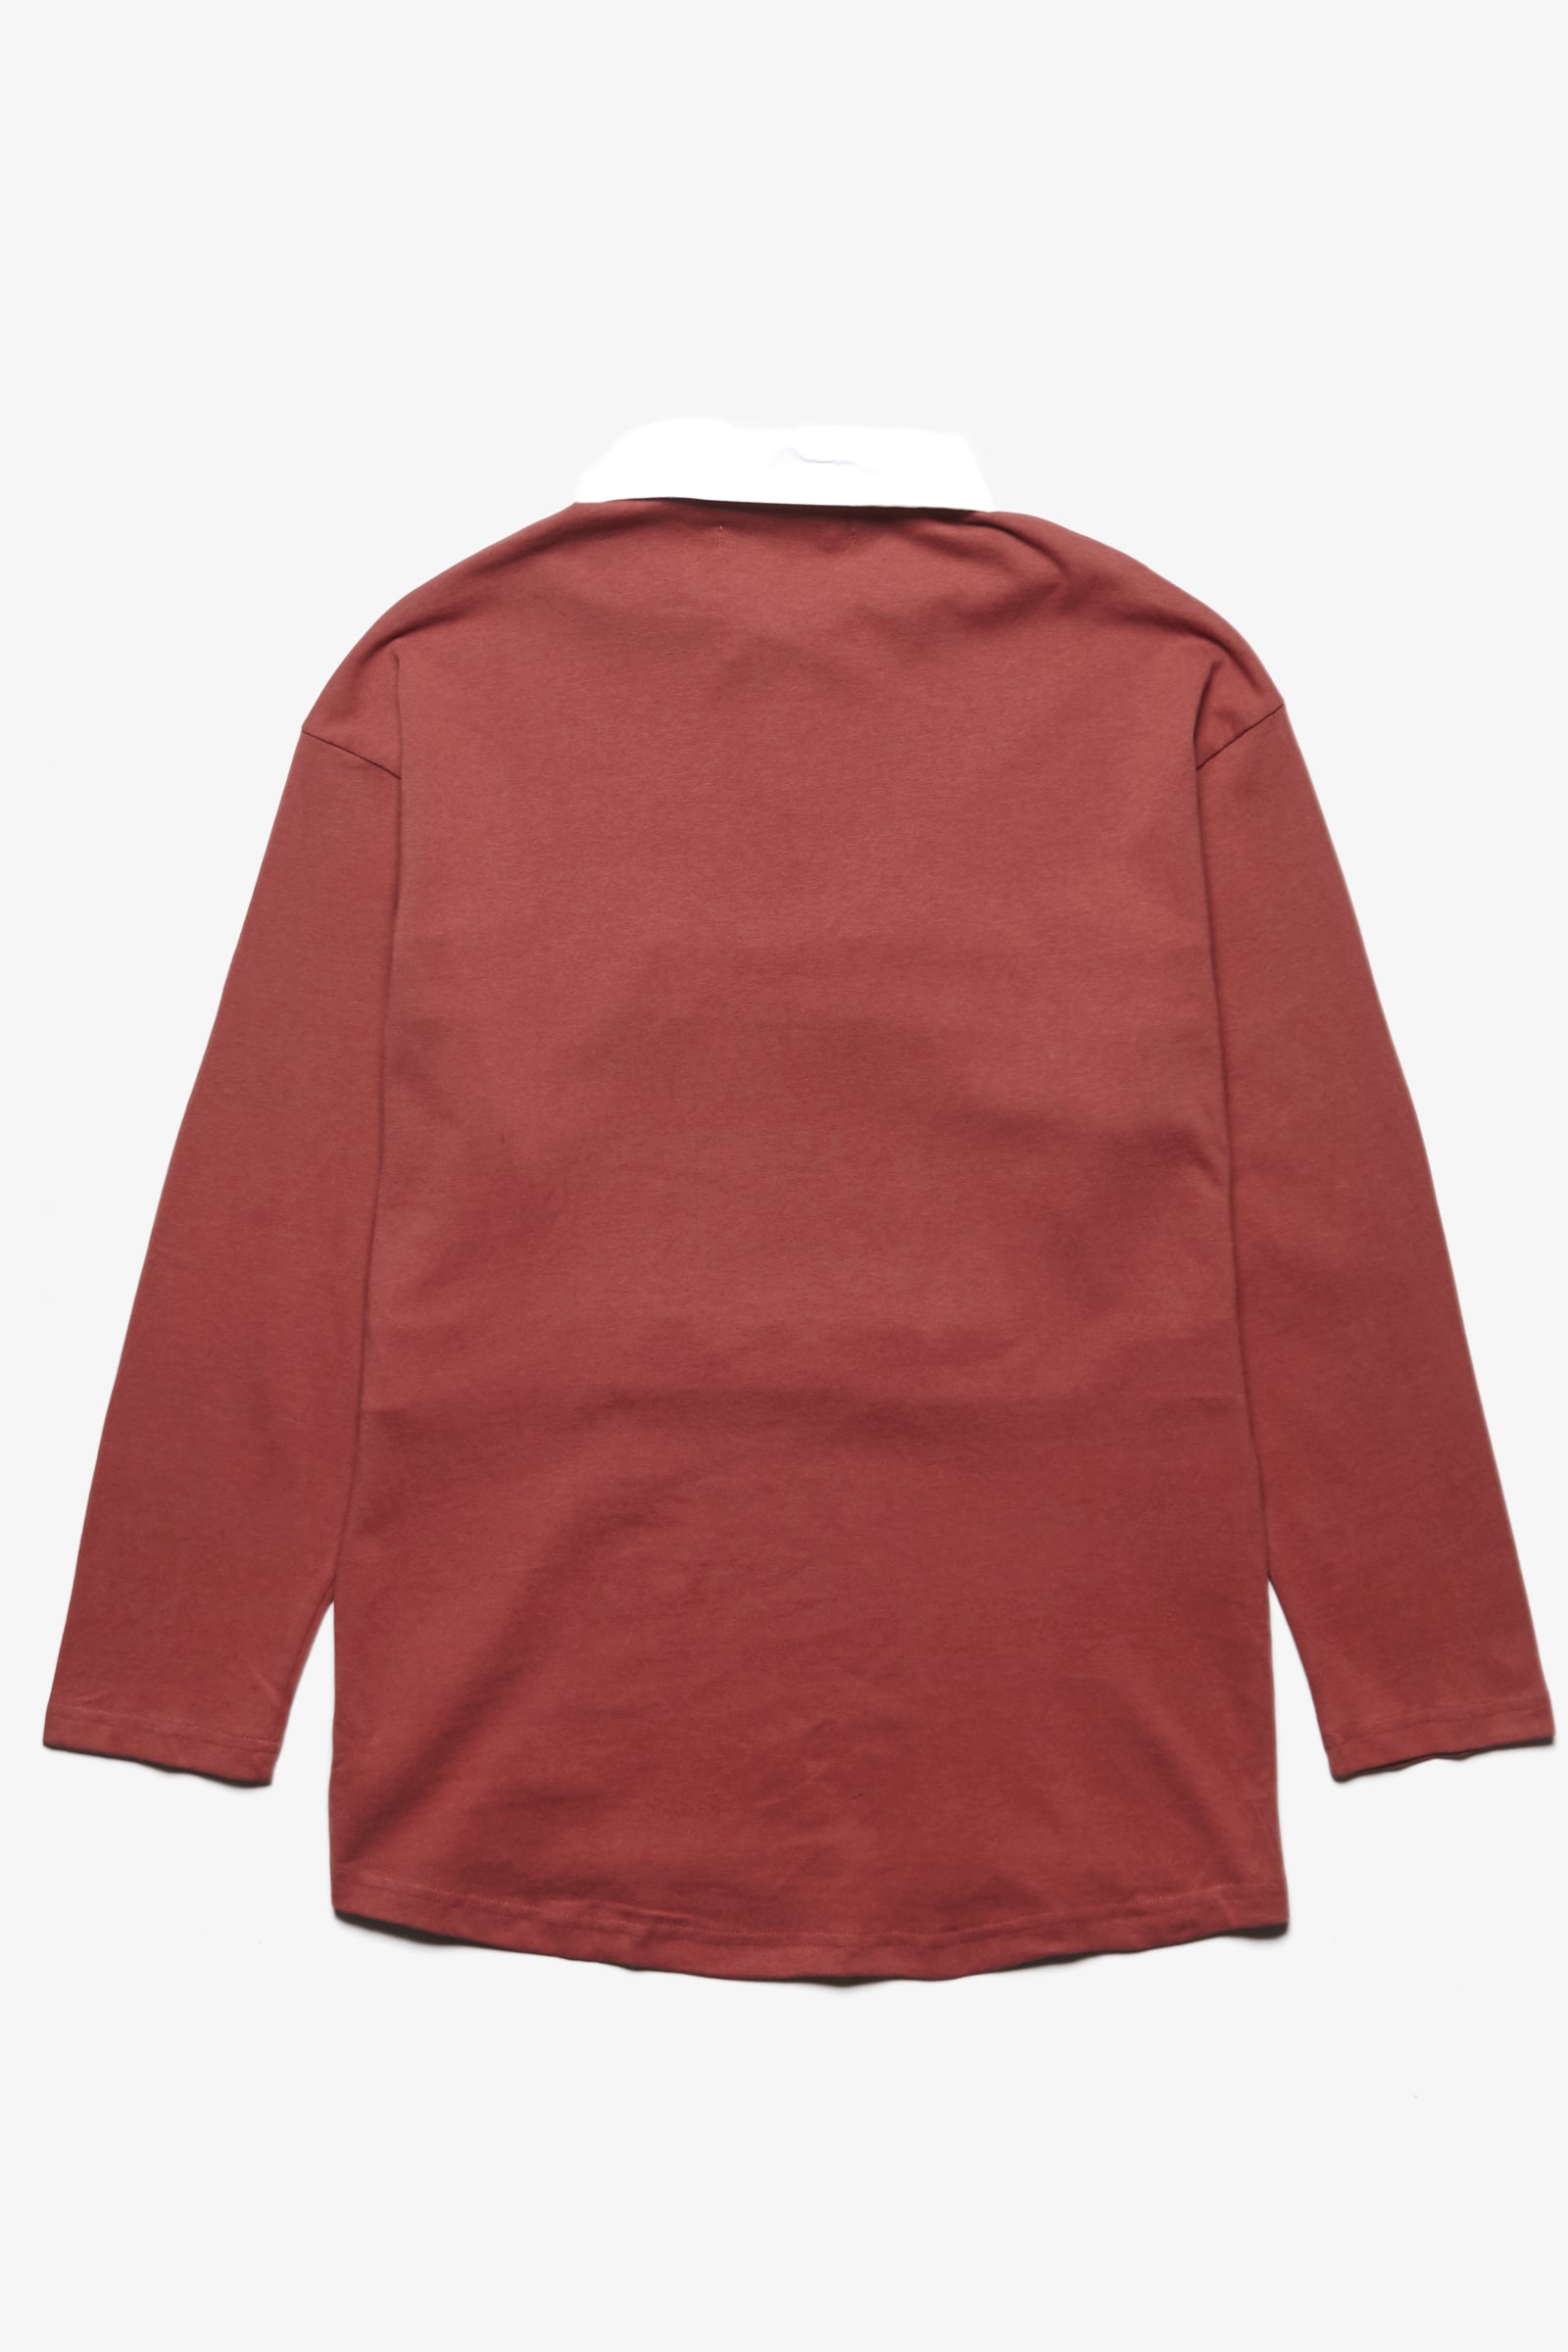 Overall Union - Field Rugby Shirt - Terracotta